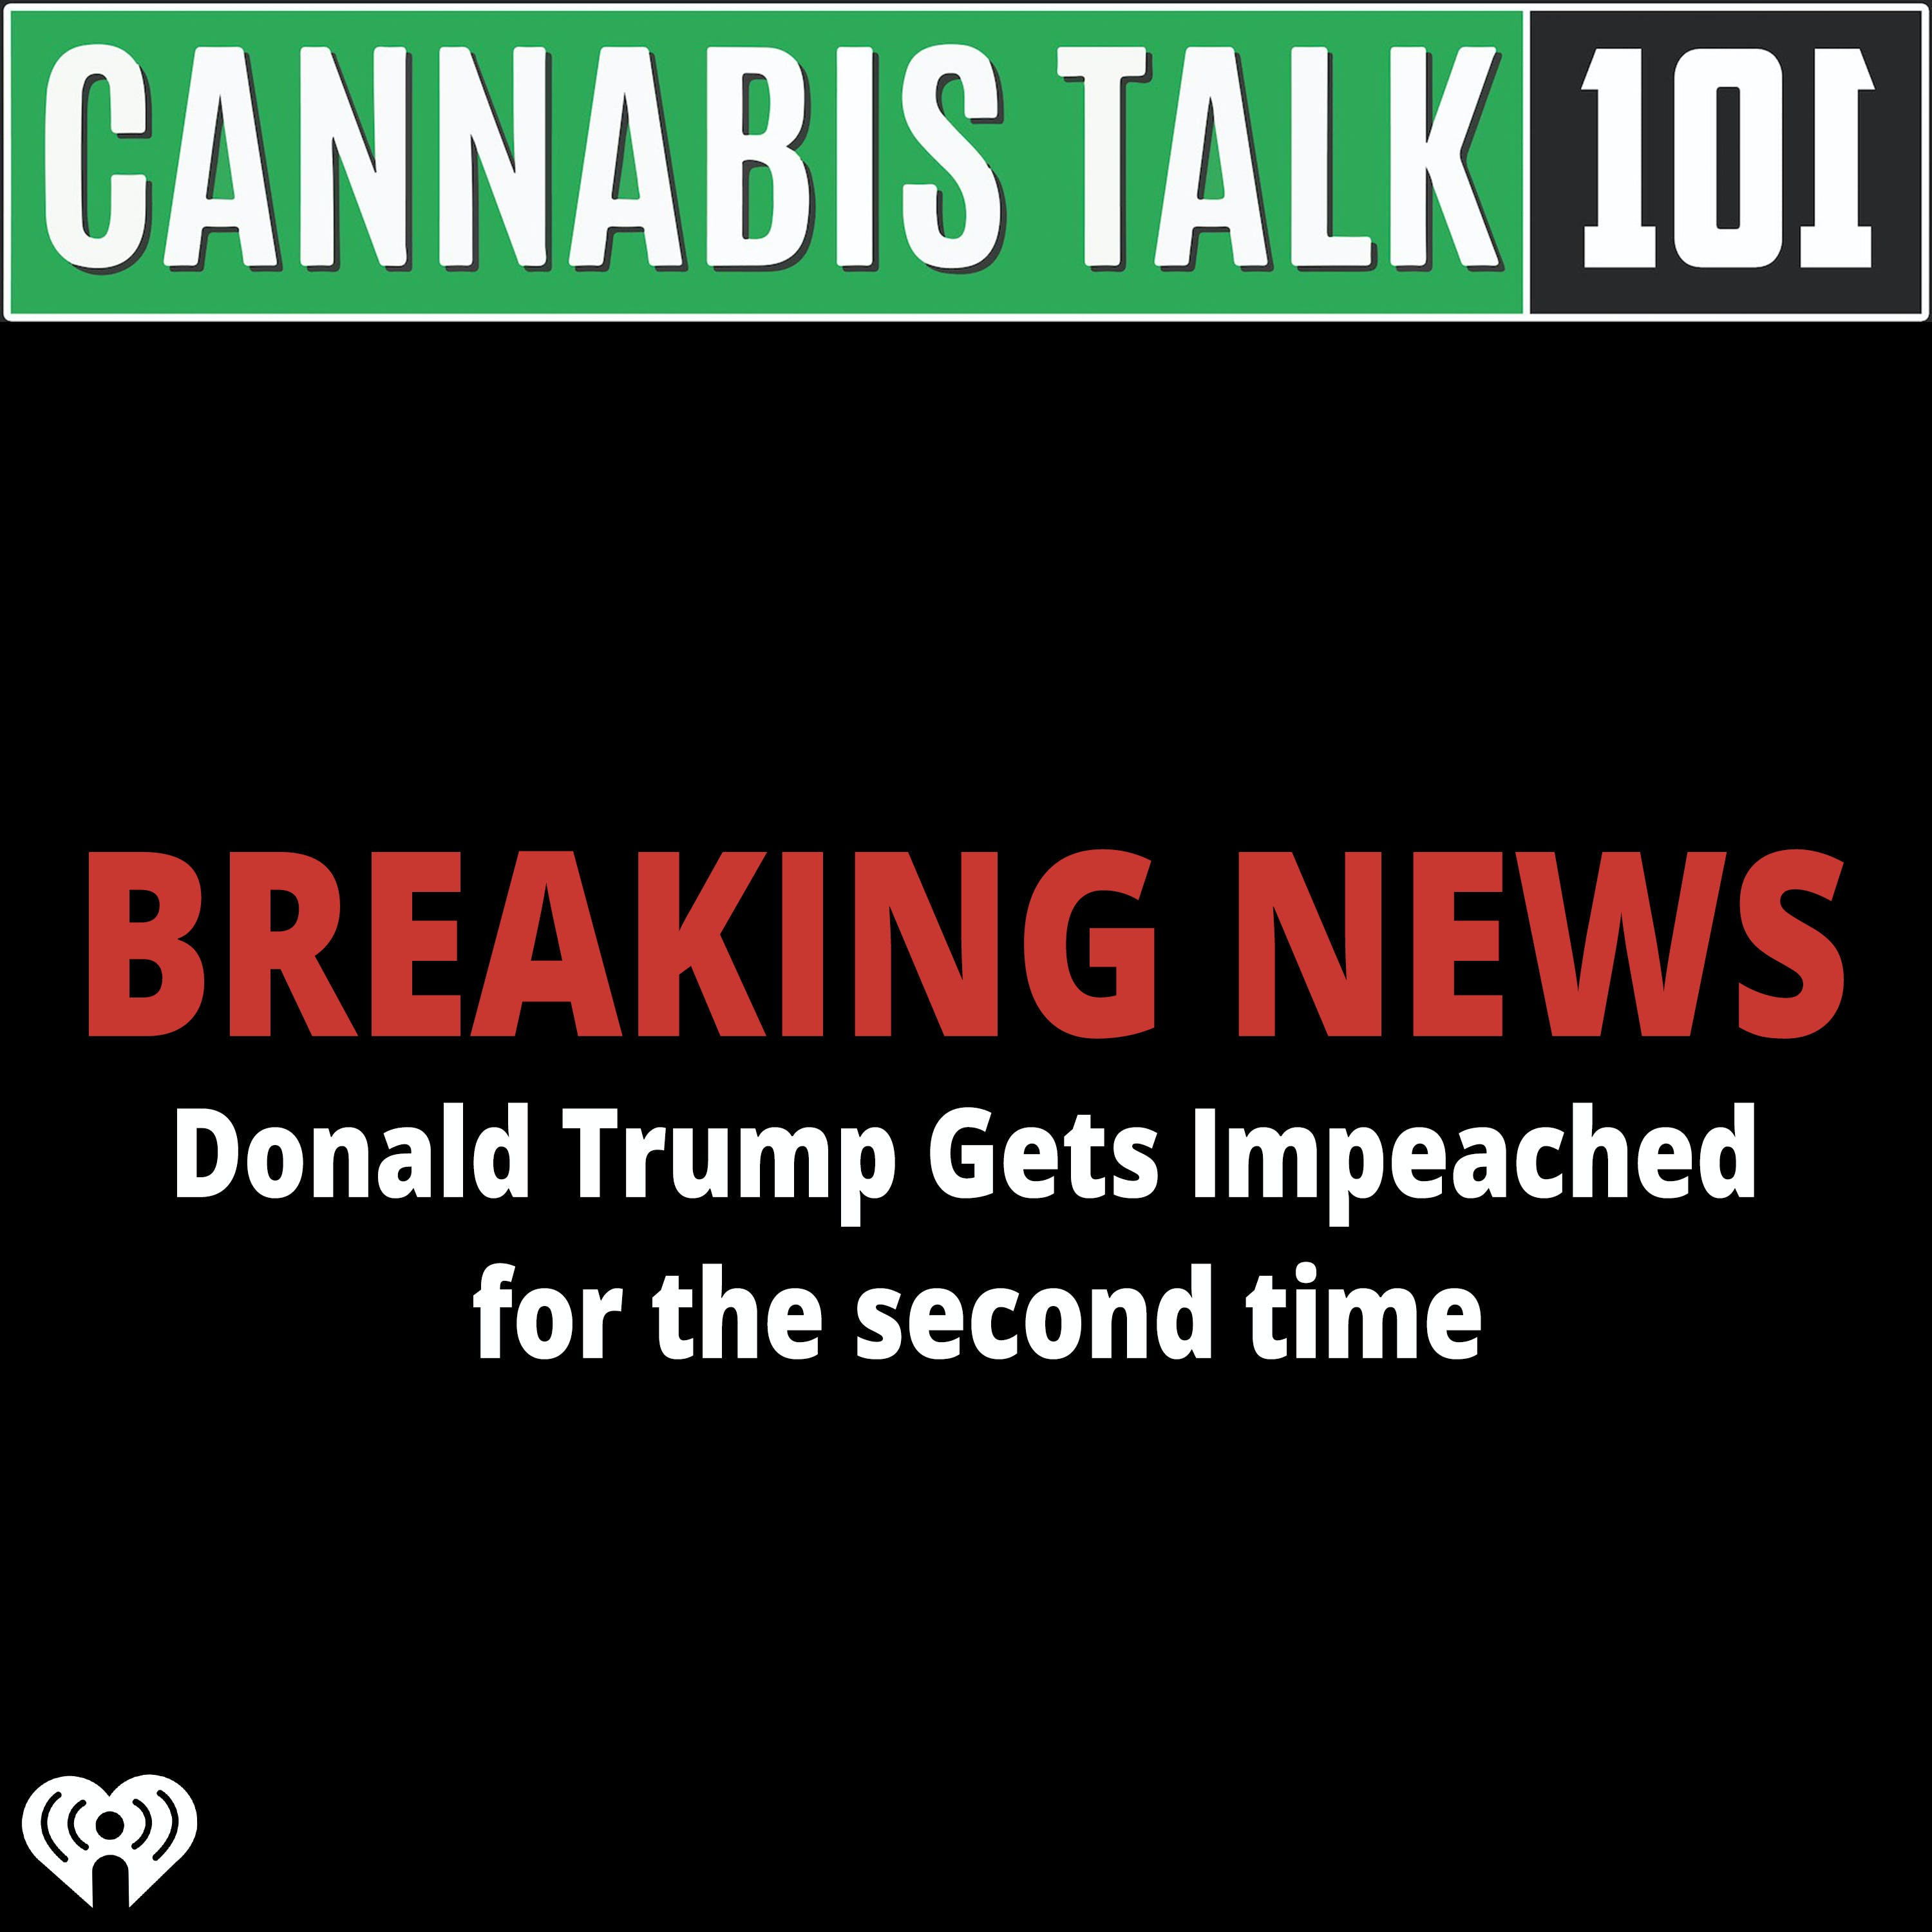  BREAKING NEWS Donald Trump Gets Impeached for the 2nd time.